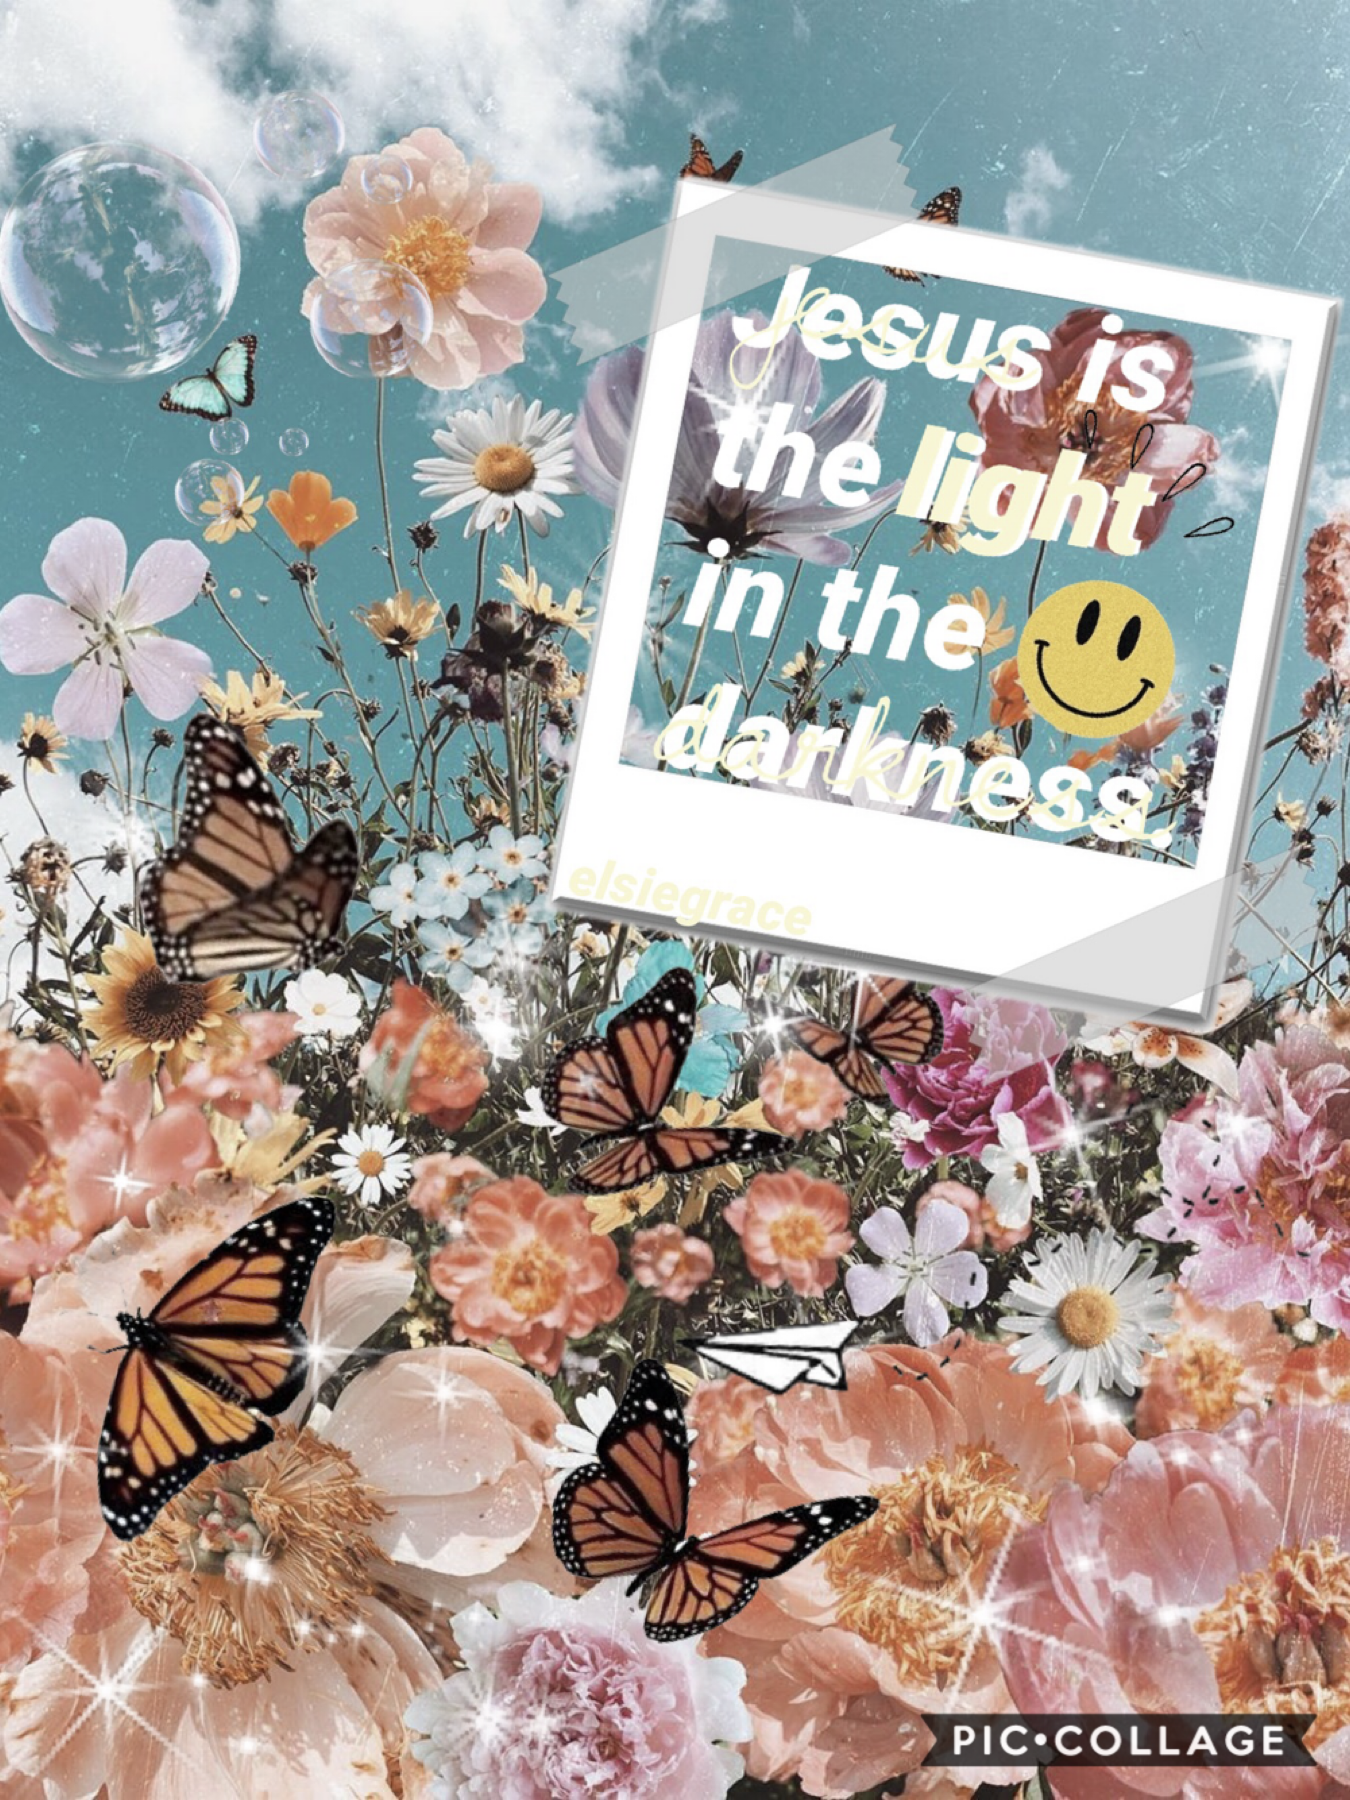 He is the light!